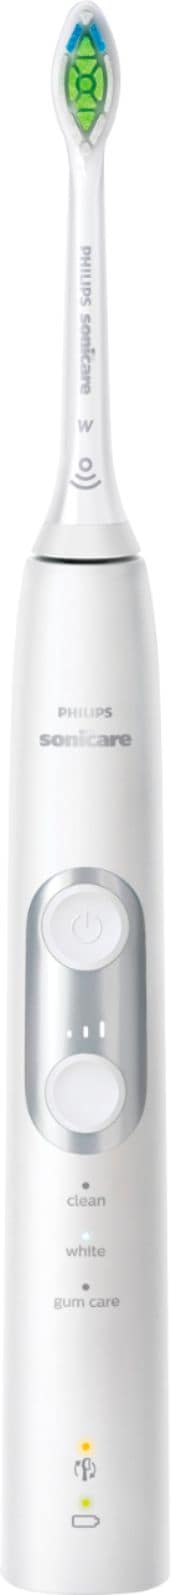 Philips Sonicare - ProtectiveClean 6100 Rechargeable Toothbrush - White_0